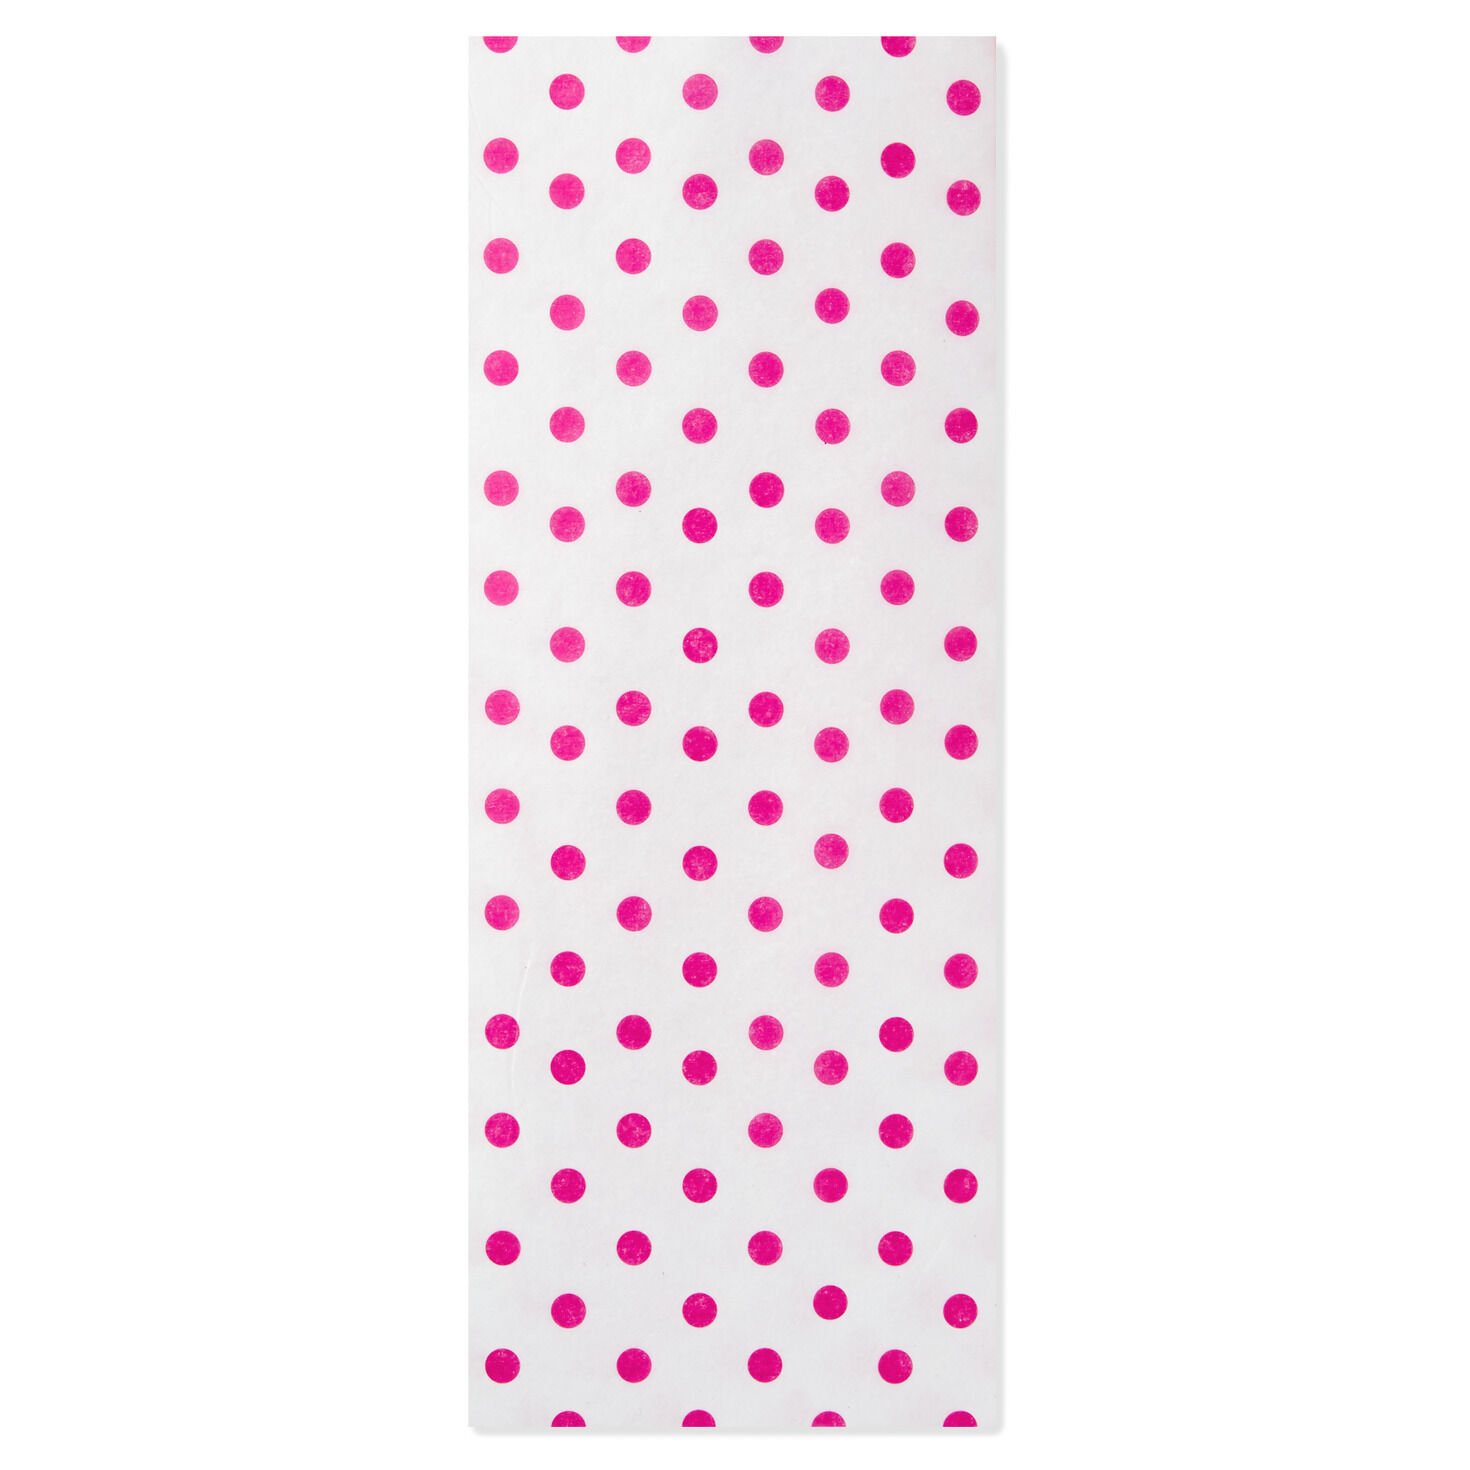 Chocolate Transfer Sheet pink Poka Dots Edible for Decorations A4